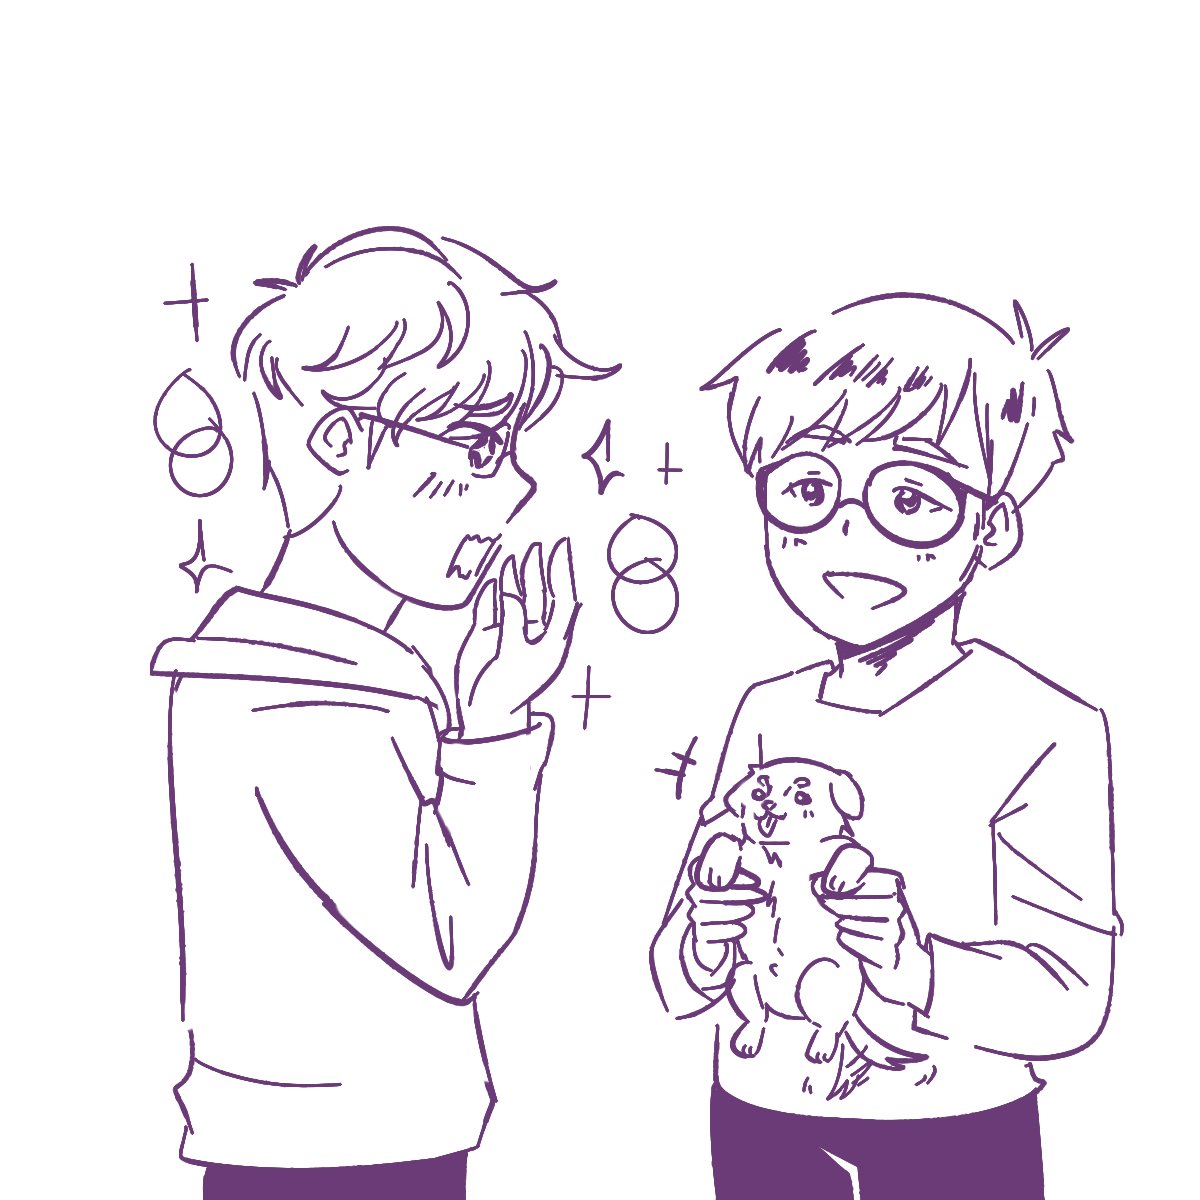 TwoSet with a puppysry idk how to draw animals LOL